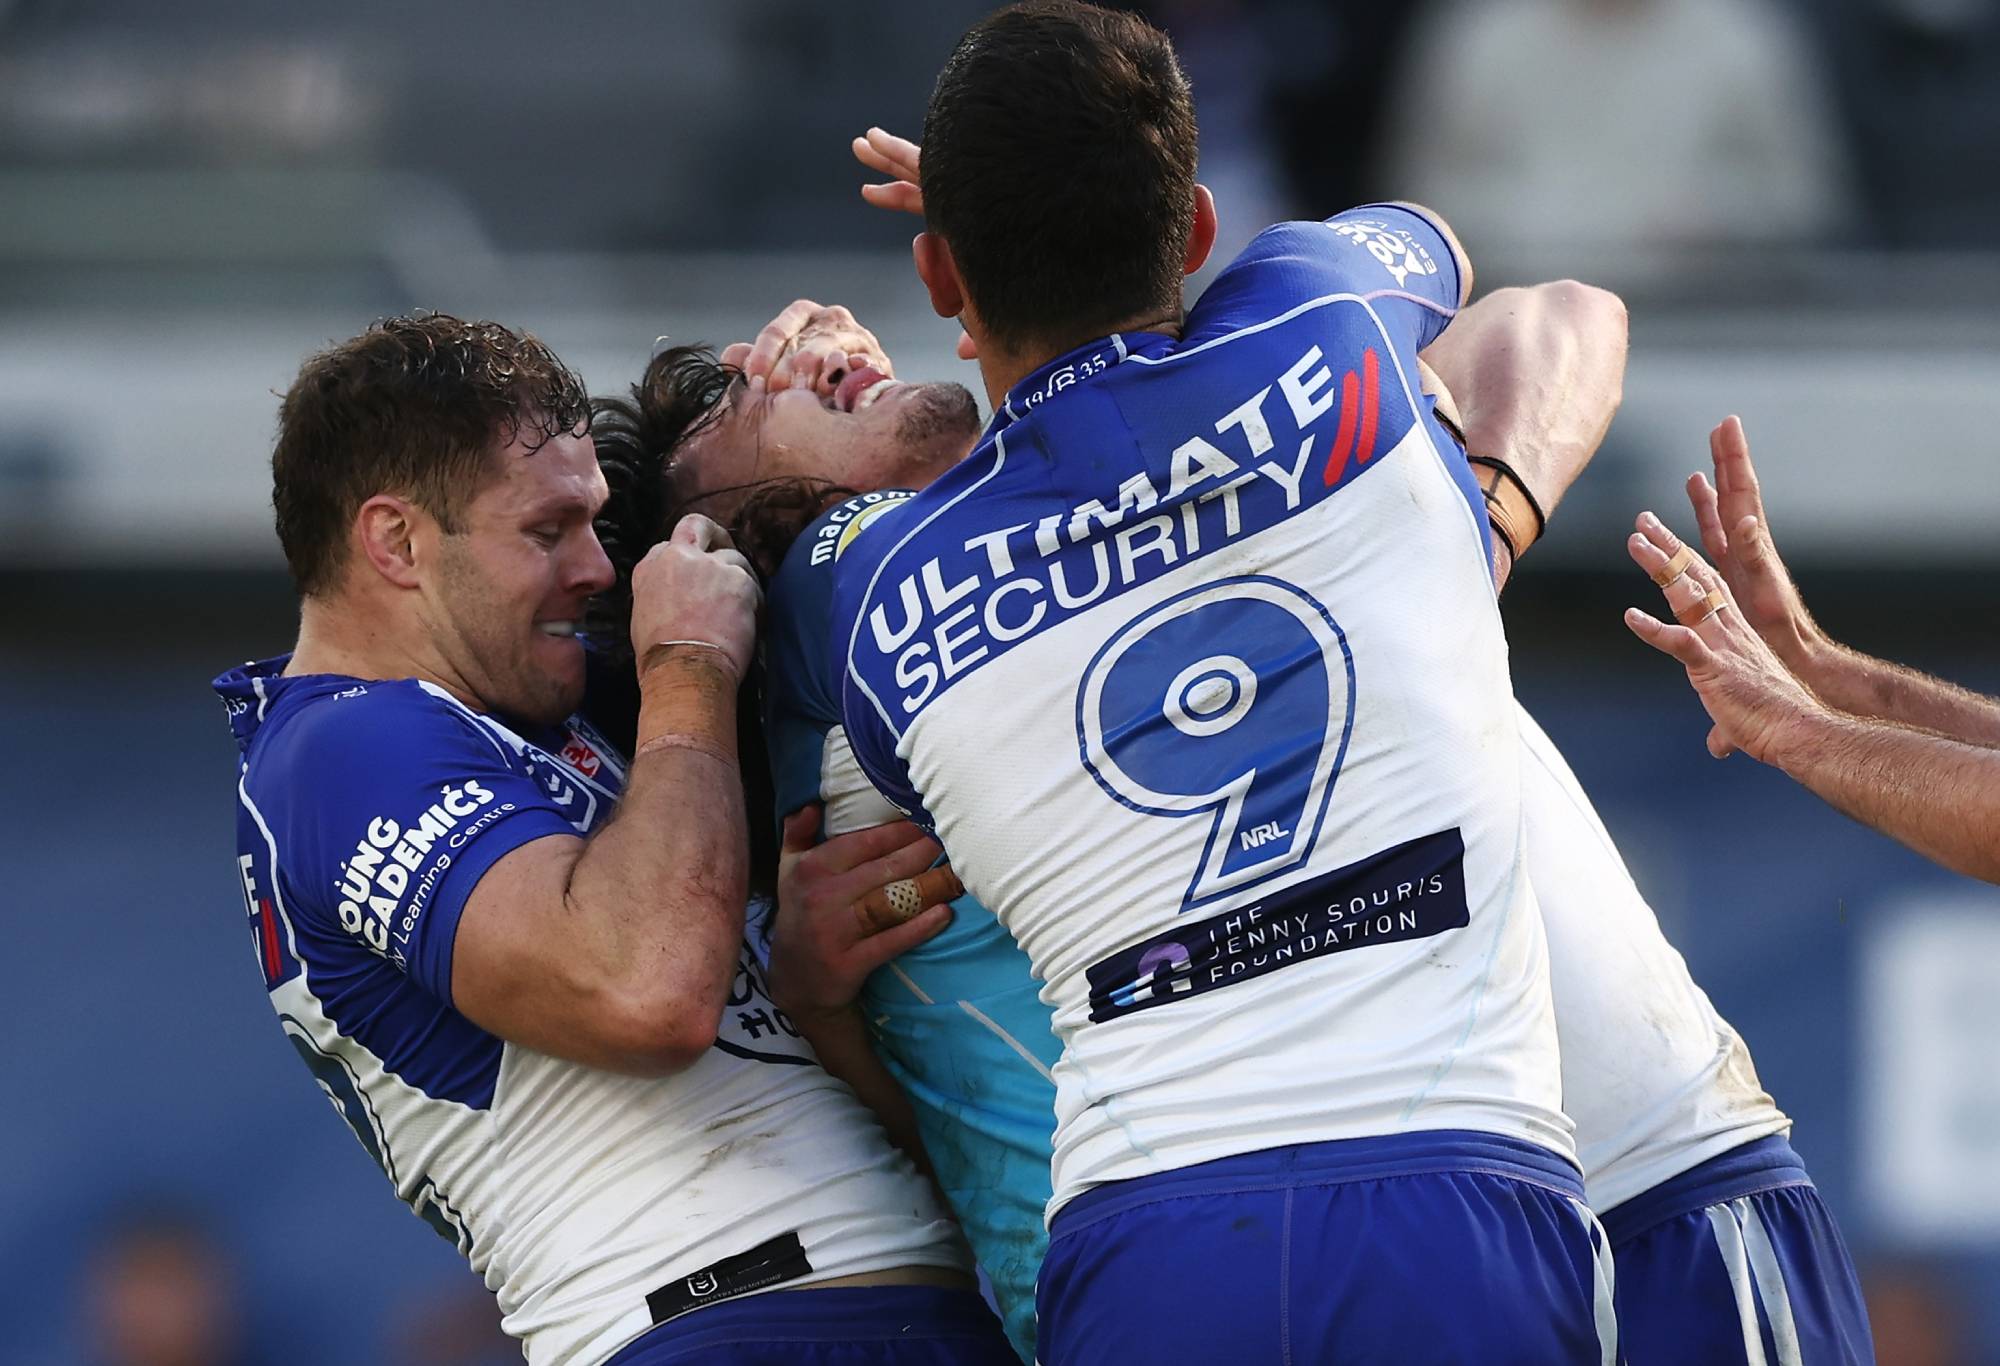 SYDNEY, AUSTRALIA - JULY 24: Corey Waddell of the Bulldogs tackles Tino Fa'asuamaleaui of the Titans with his hands on his eyes during the round 19 NRL match between the Canterbury Bulldogs and the Gold Coast Titans at CommBank Stadium, on July 24, 2022, in Sydney, Australia. (Photo by Matt King/Getty Images)